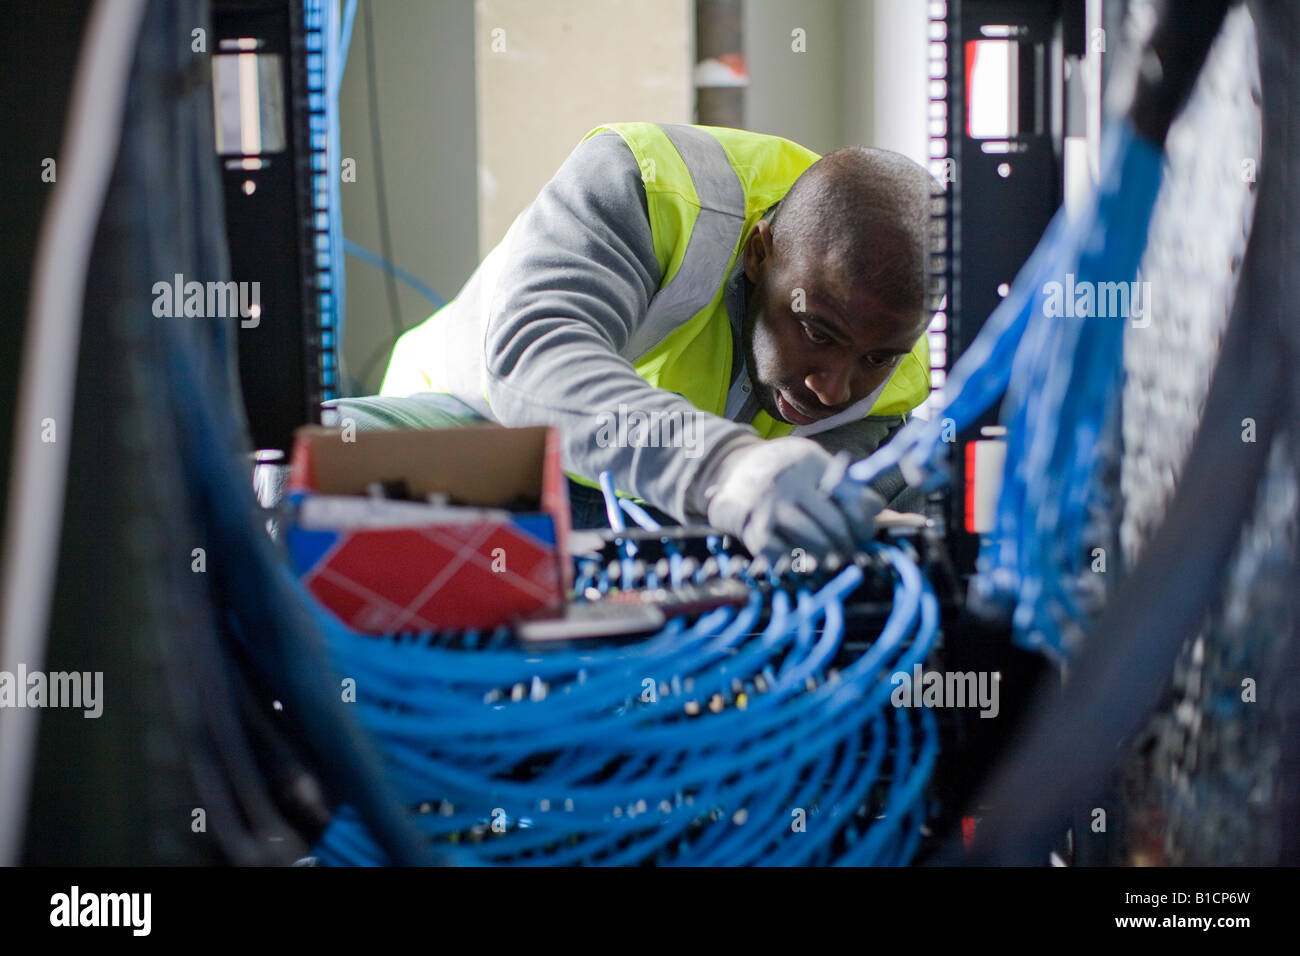 An electrician connects data cables in the comms room at new London offices. Stock Photo